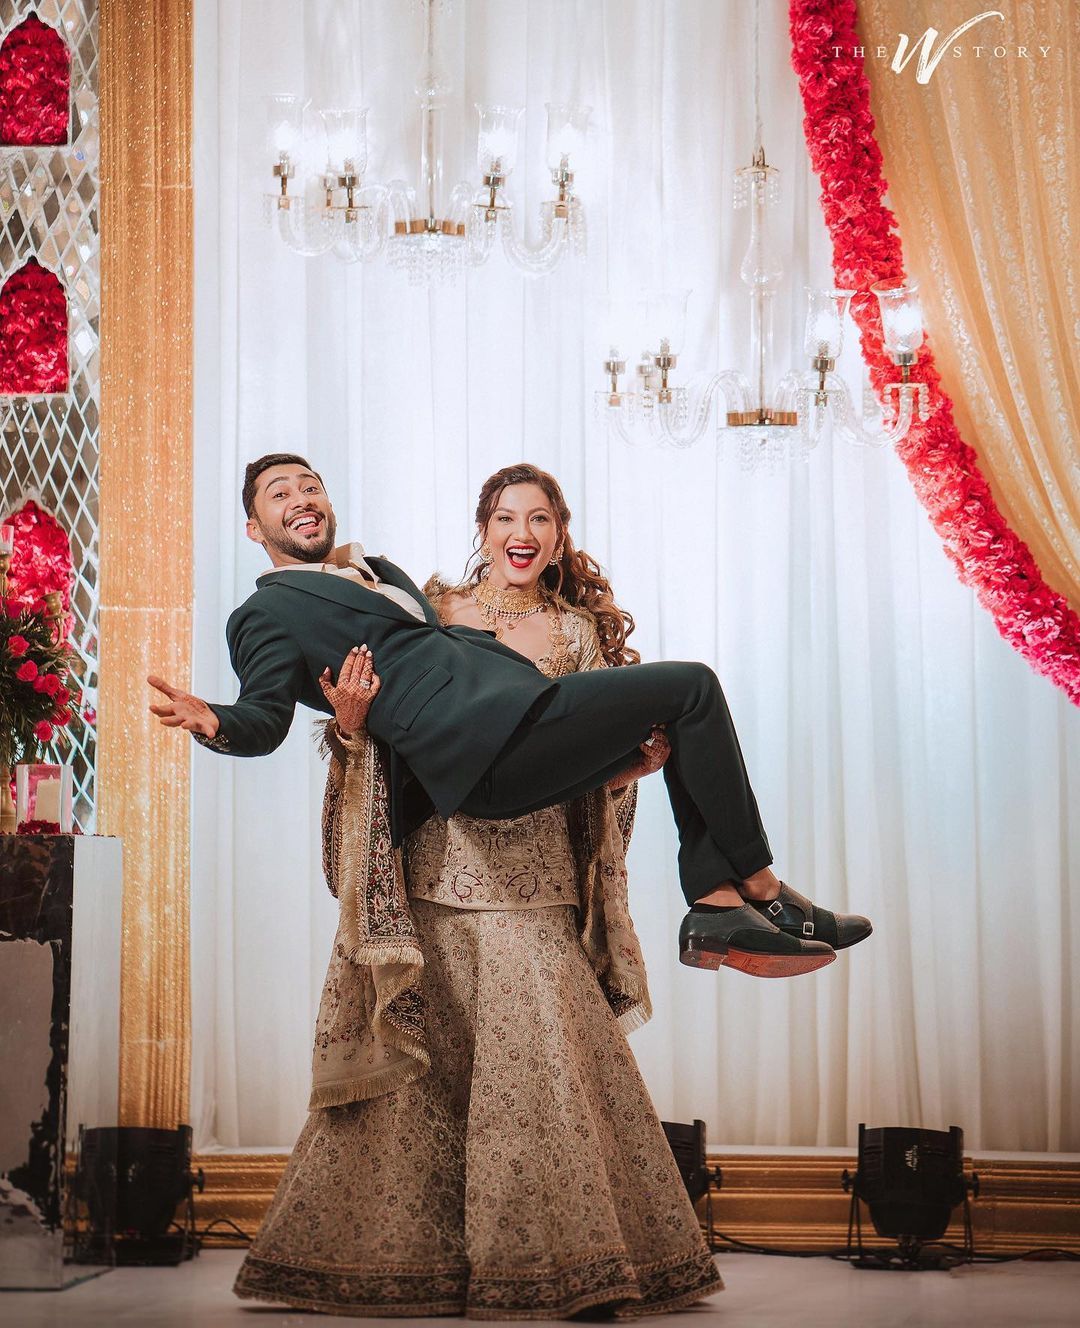 Gauahar Khan Literally Swept Husband Zaid Darbar Off His Feet At Their Walima And Fans Are Loving It! See Pictures